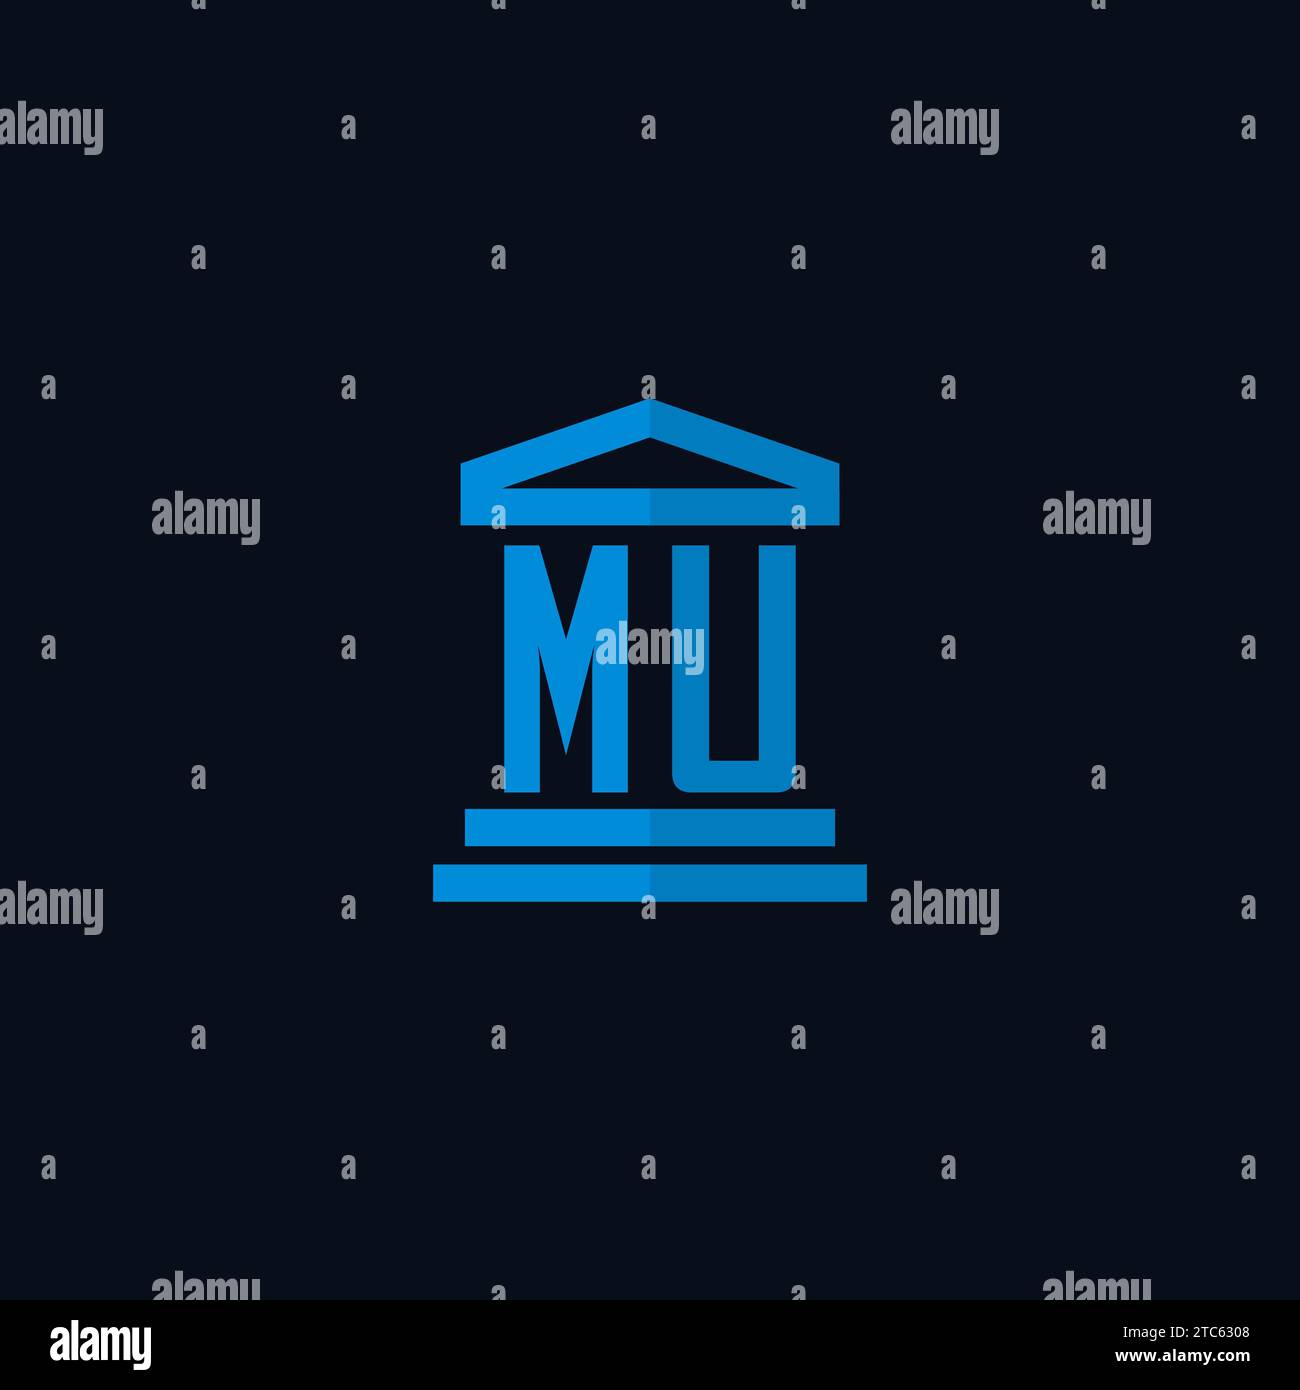 MU initial logo monogram with simple courthouse building icon design ideas Stock Vector